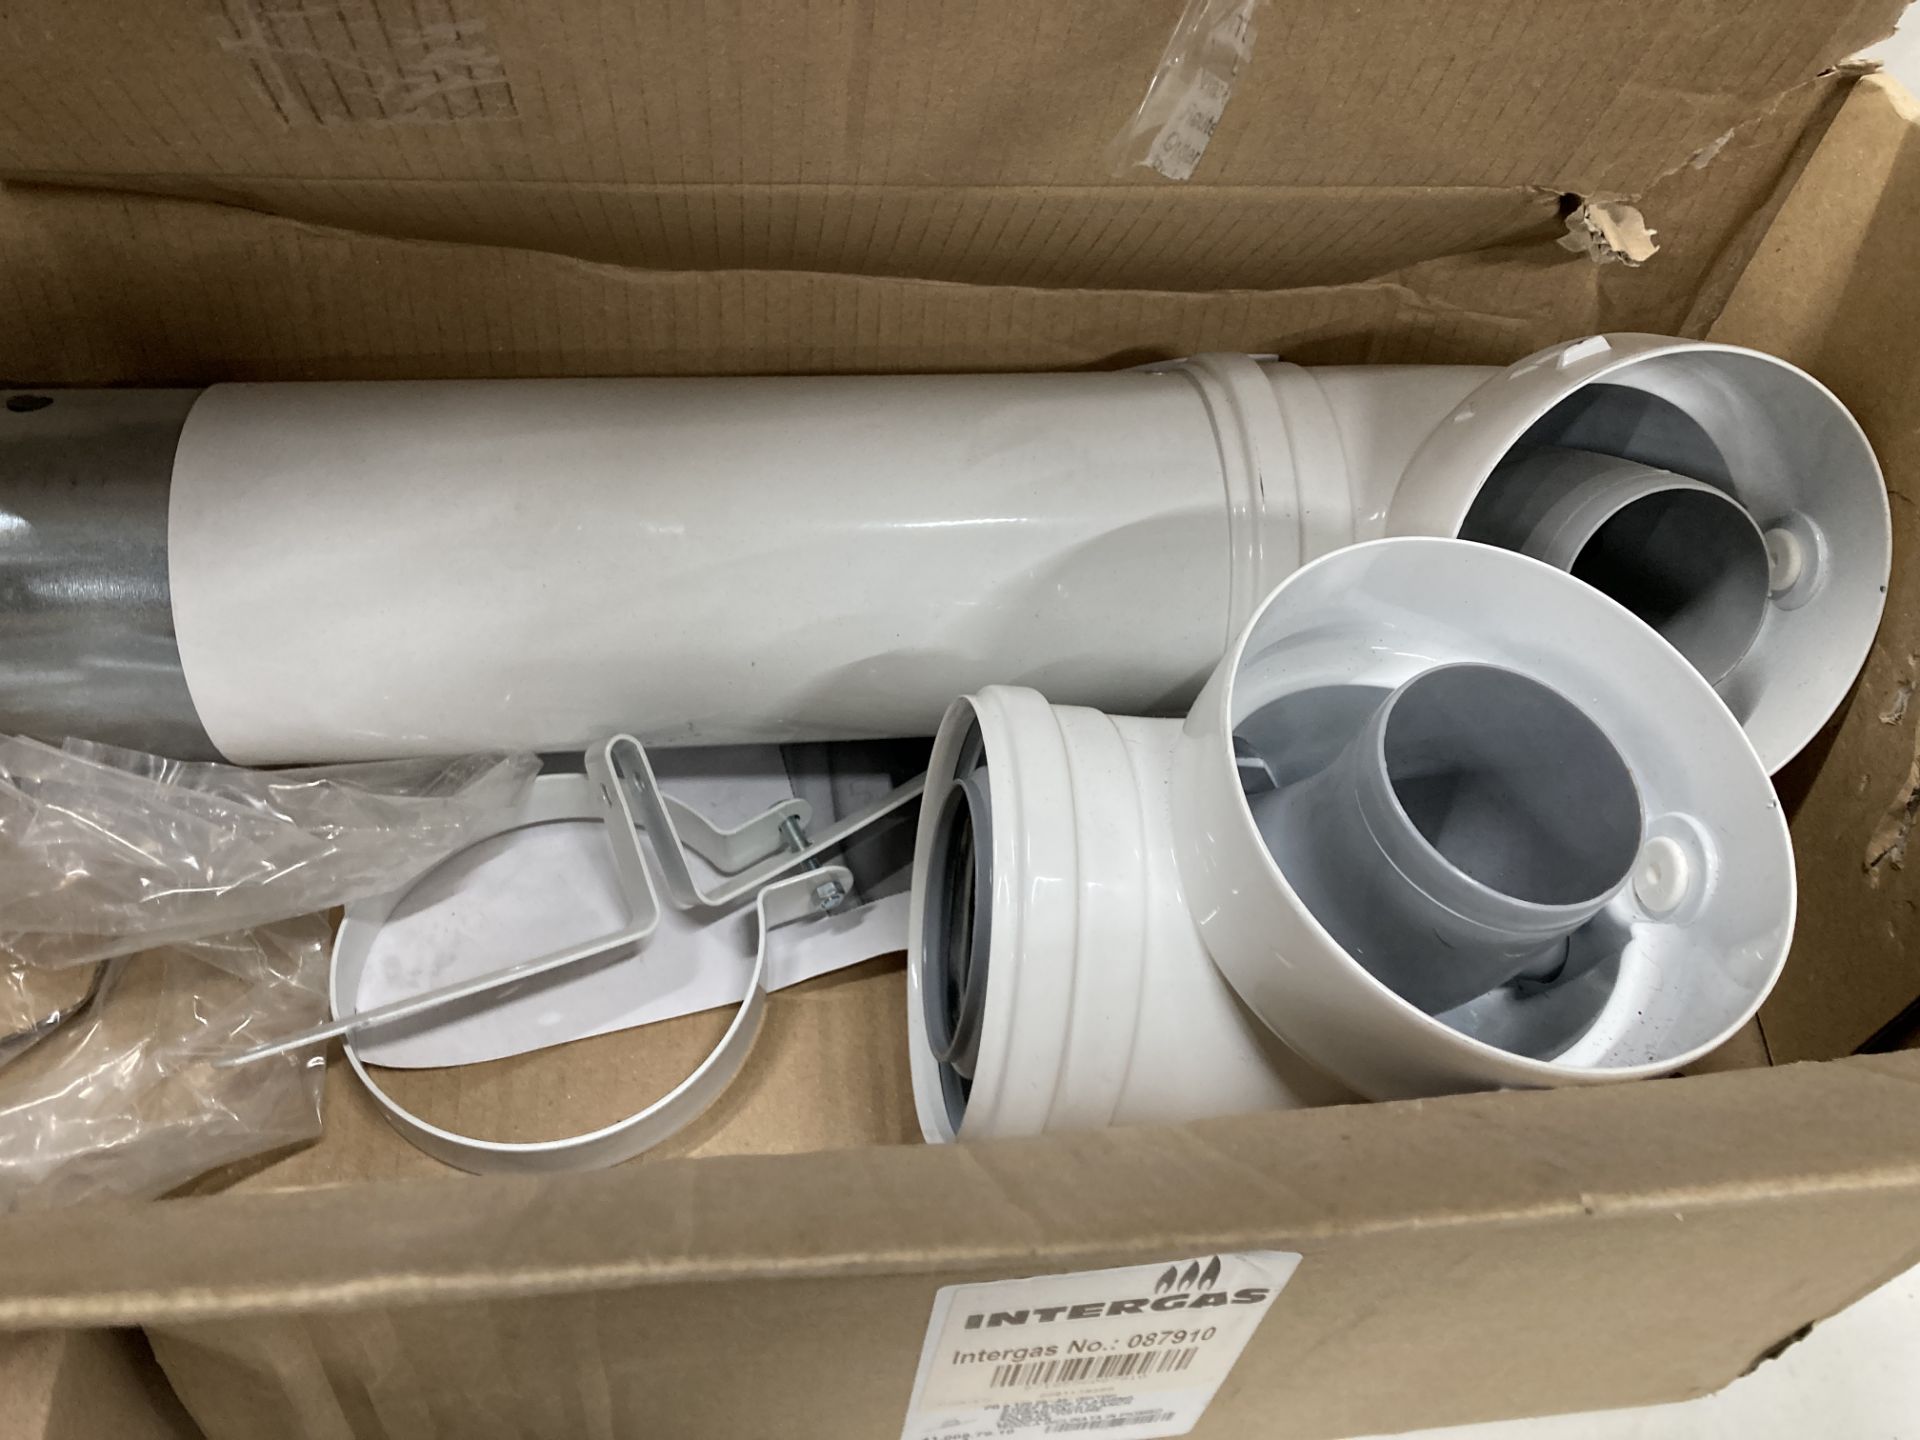 3 x Intergas Spare Parts As Listed - Image 5 of 5